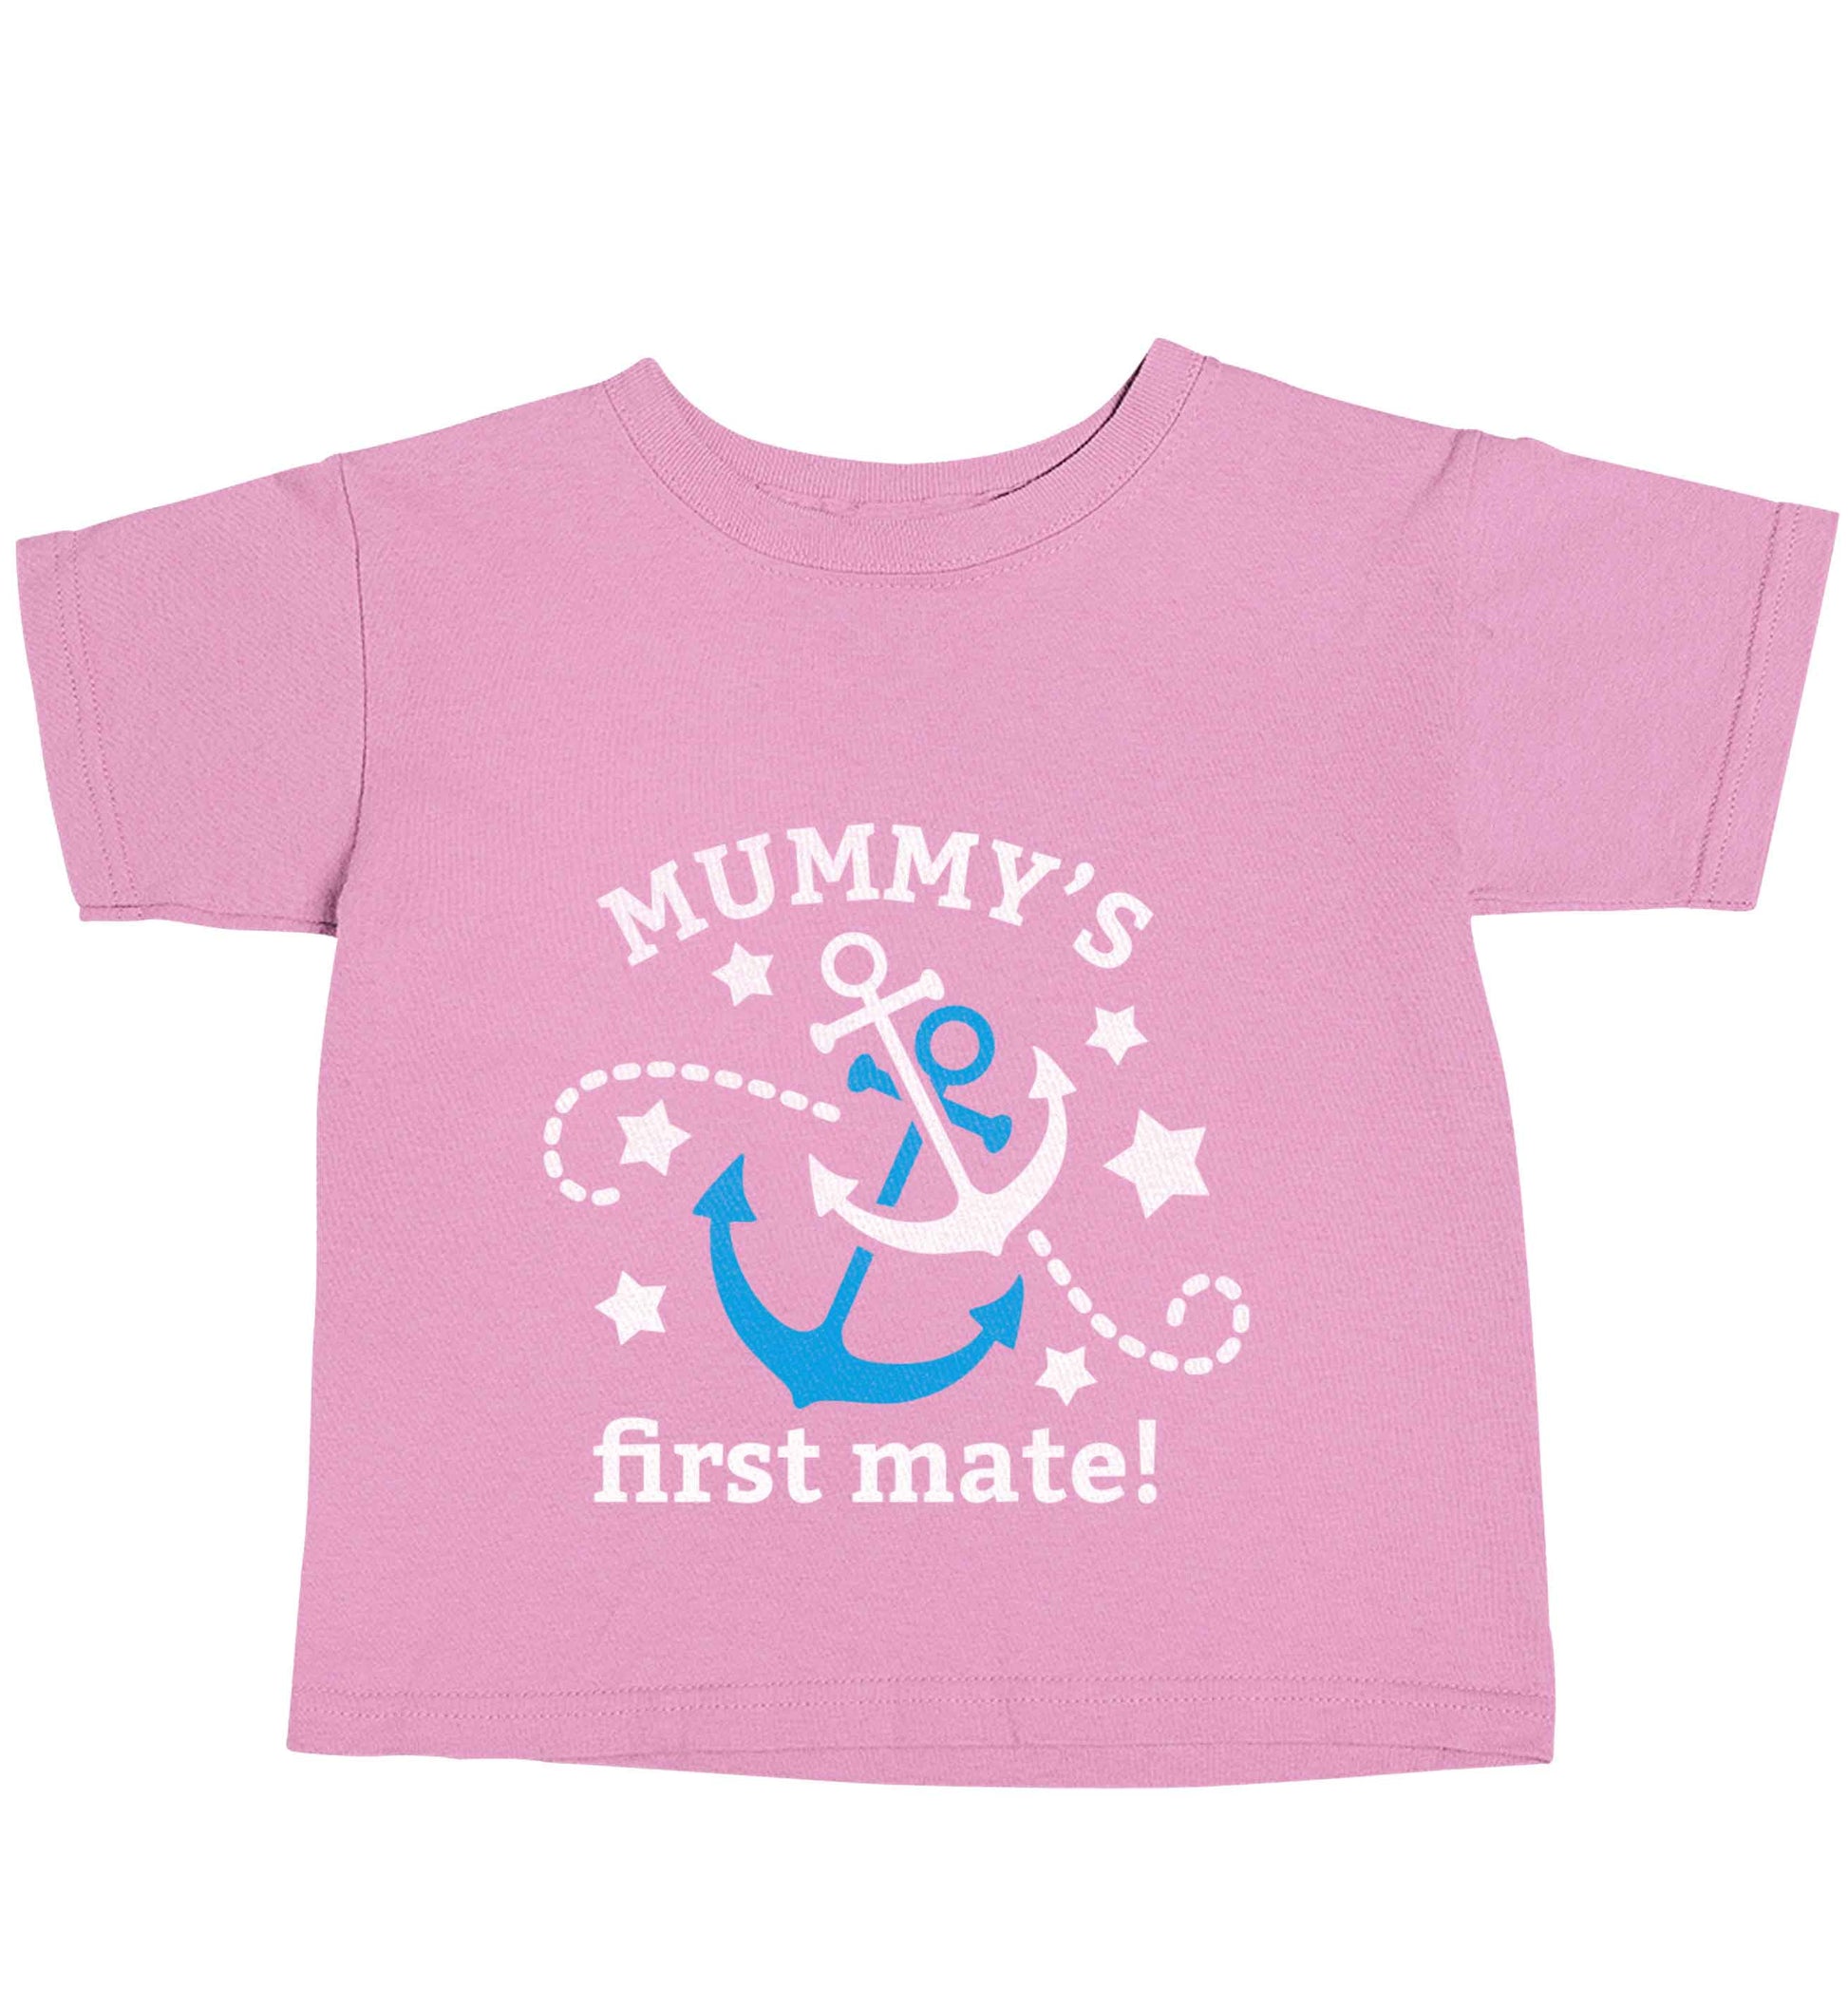 Mummy's First Mate light pink baby toddler Tshirt 2 Years